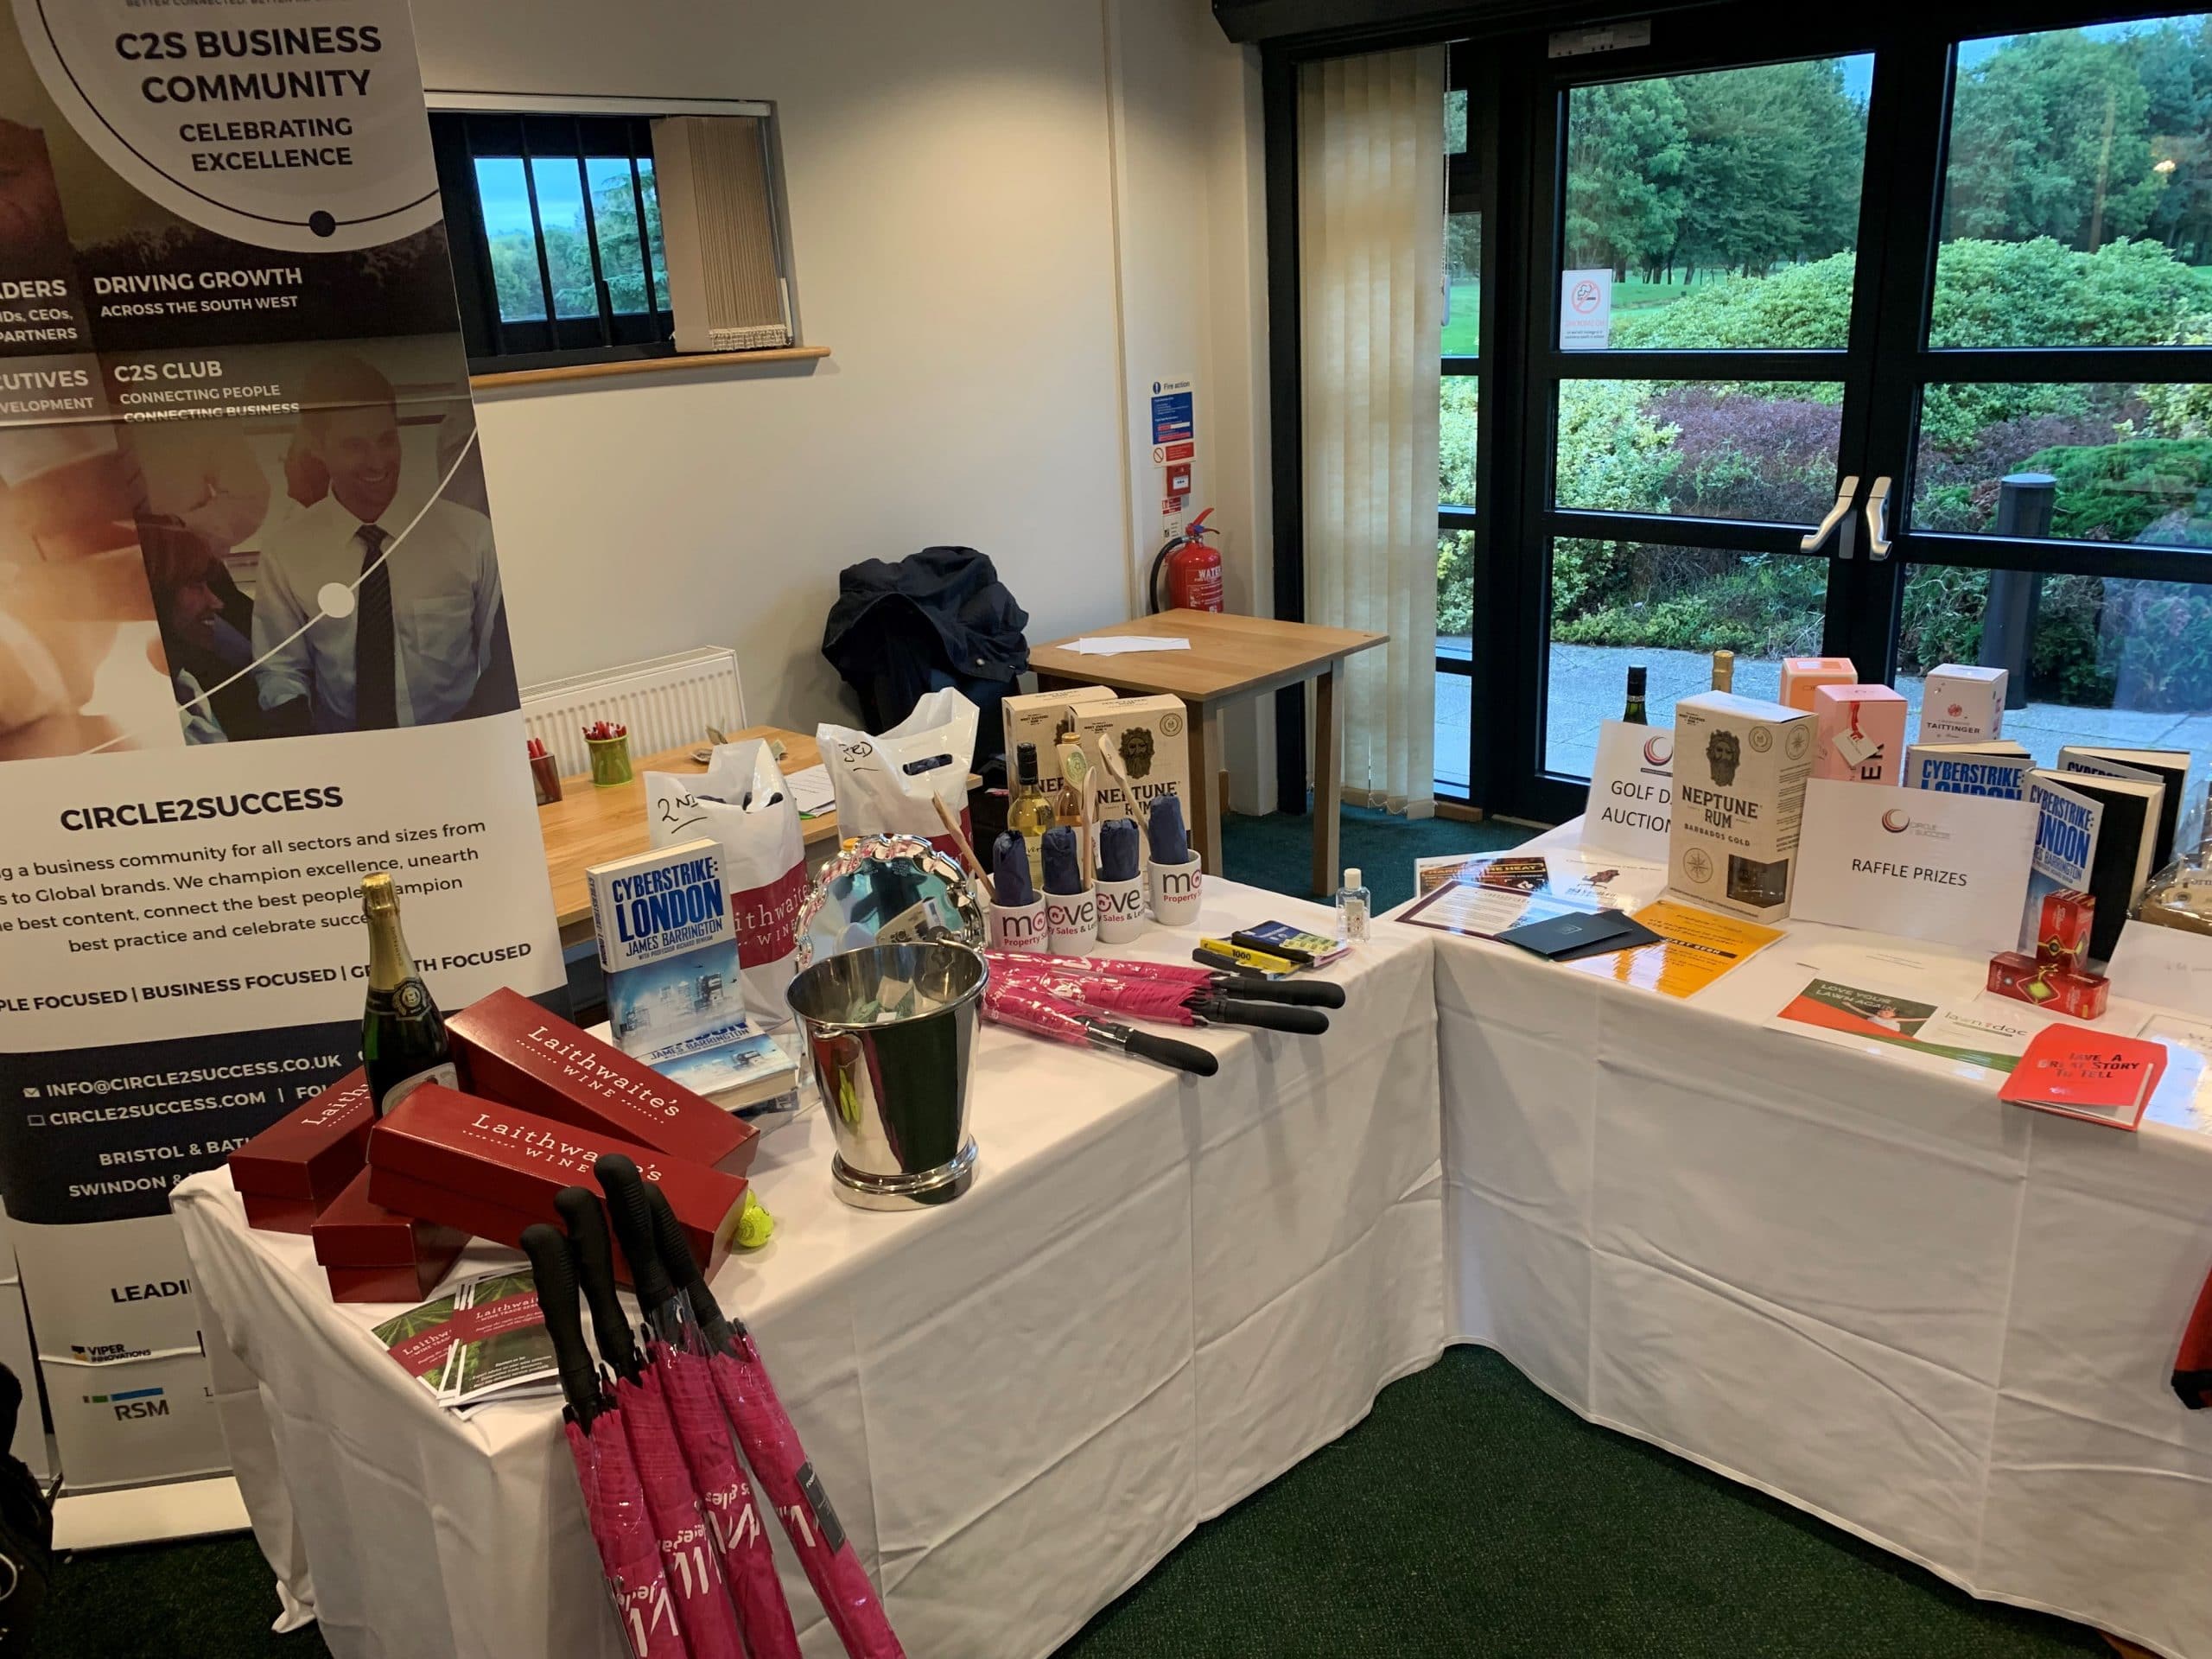 C2S golf 14th October prize table